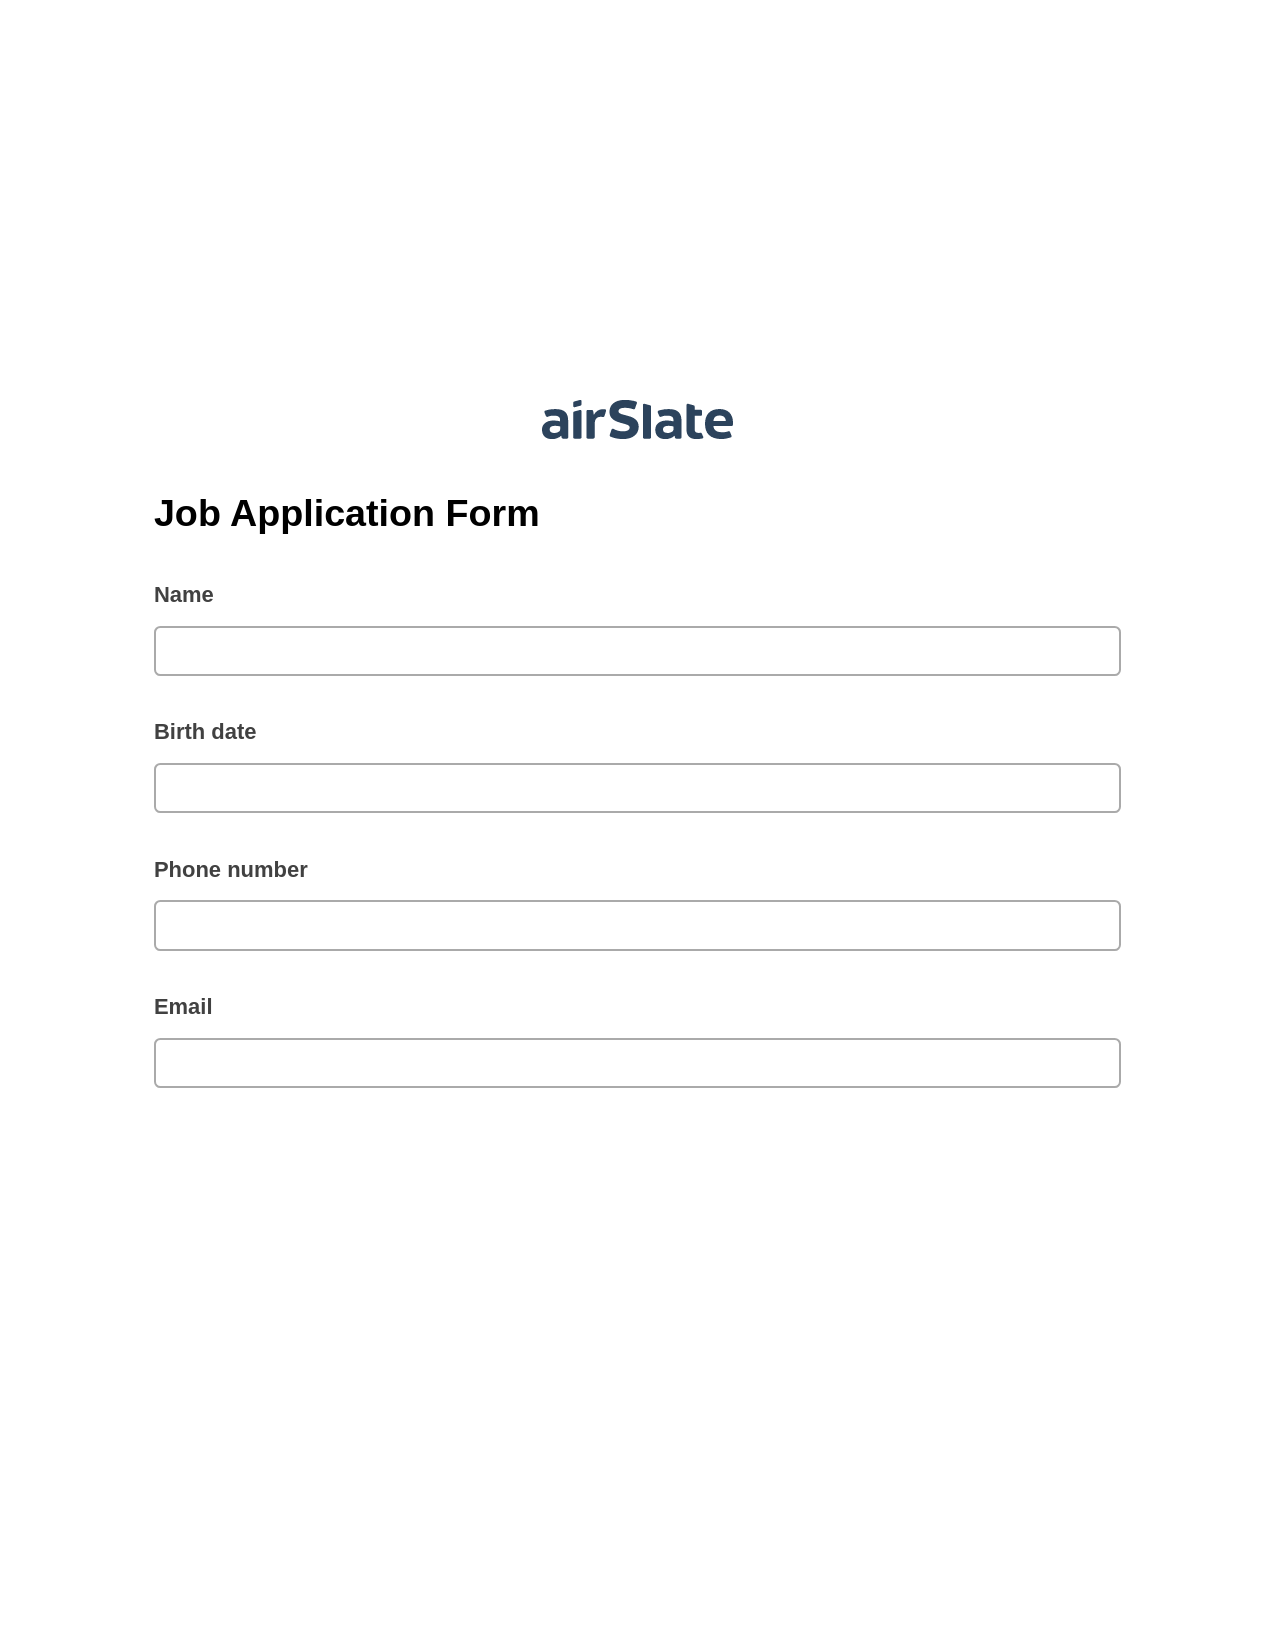 Multirole Job Application Form Pre-fill Dropdown from Airtable, Create NetSuite Records Bot, Export to MySQL Bot